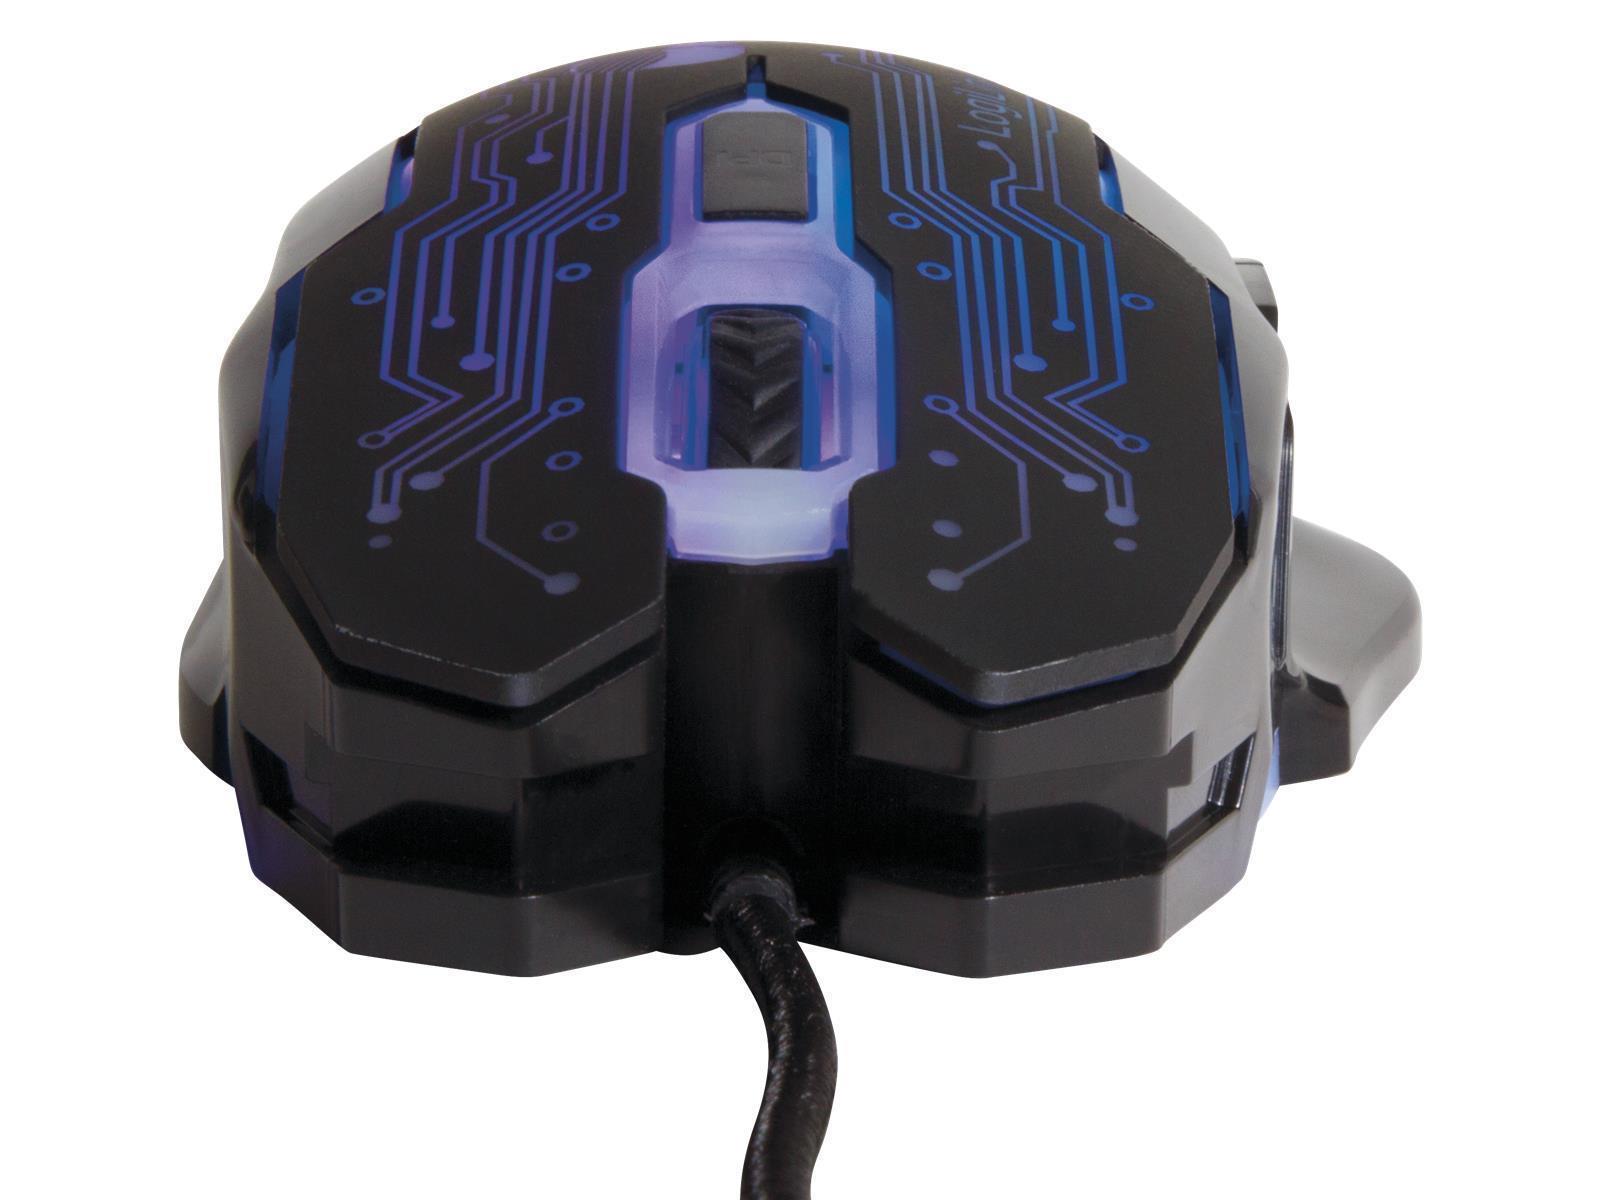 Maus, Gaming Mouse, USB 6-Button, 2400dpi